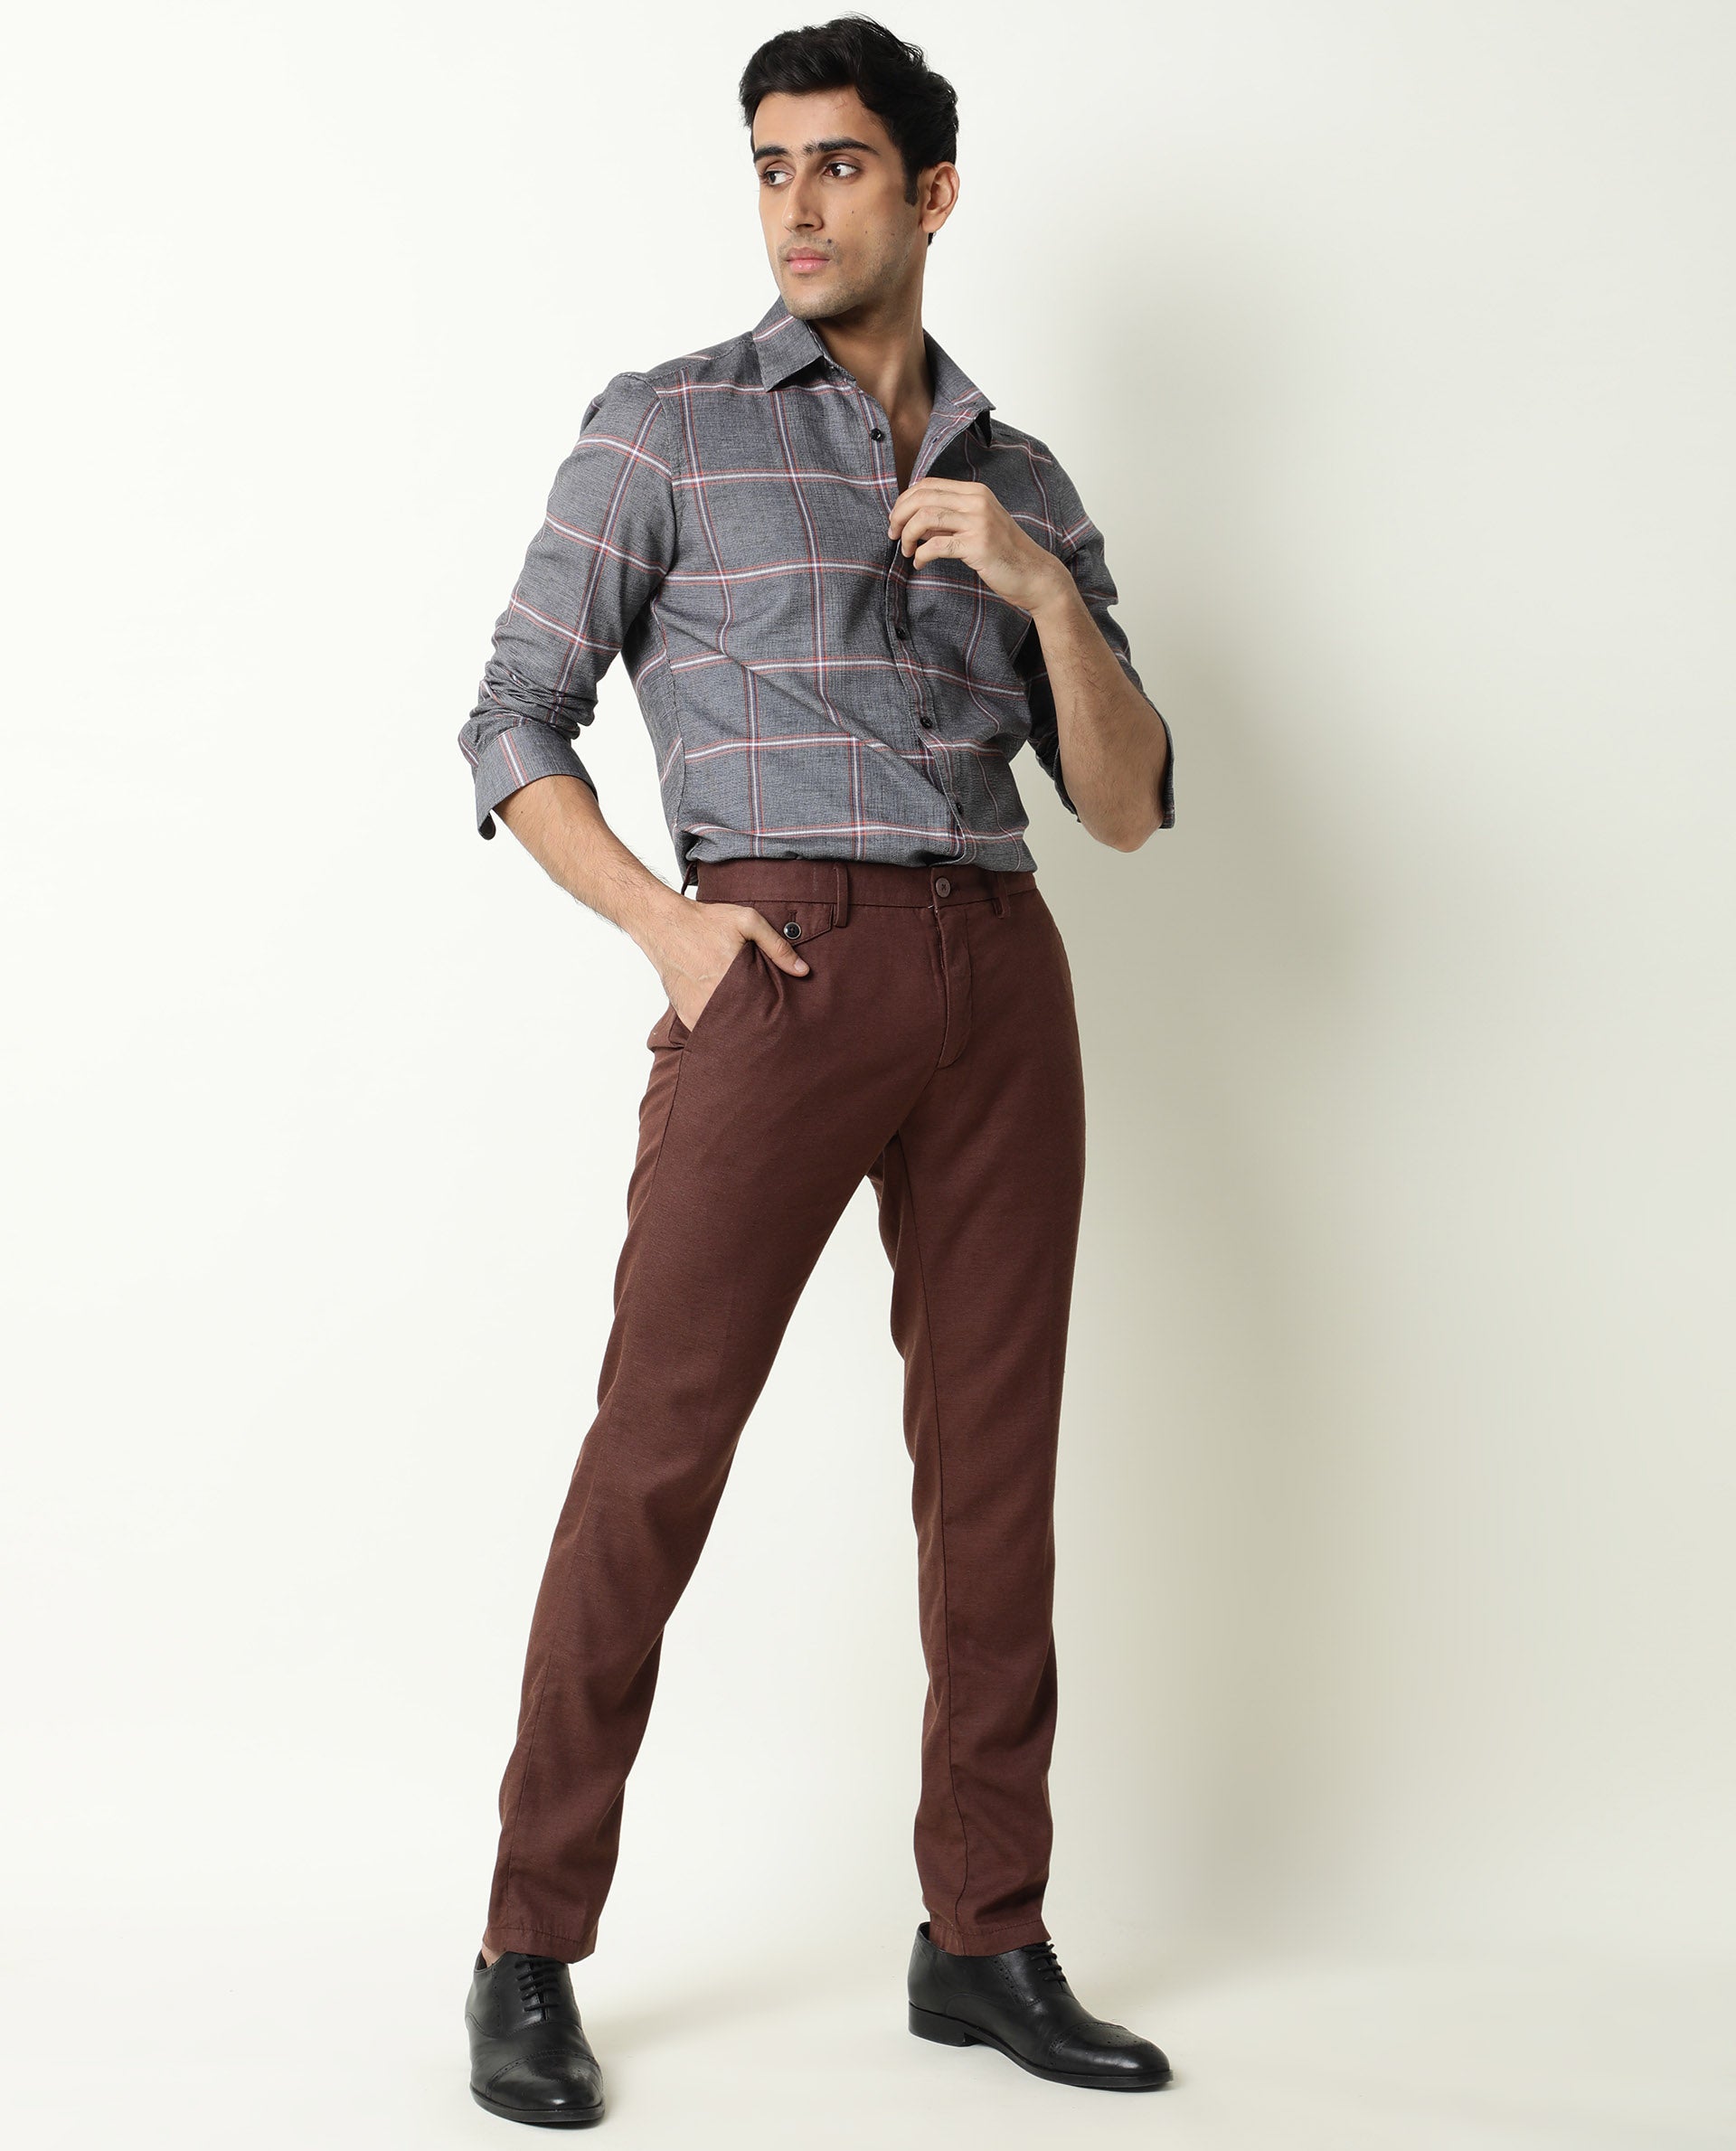 Burgundy Dress Pants Outfits For Men (8 ideas & outfits) | Lookastic